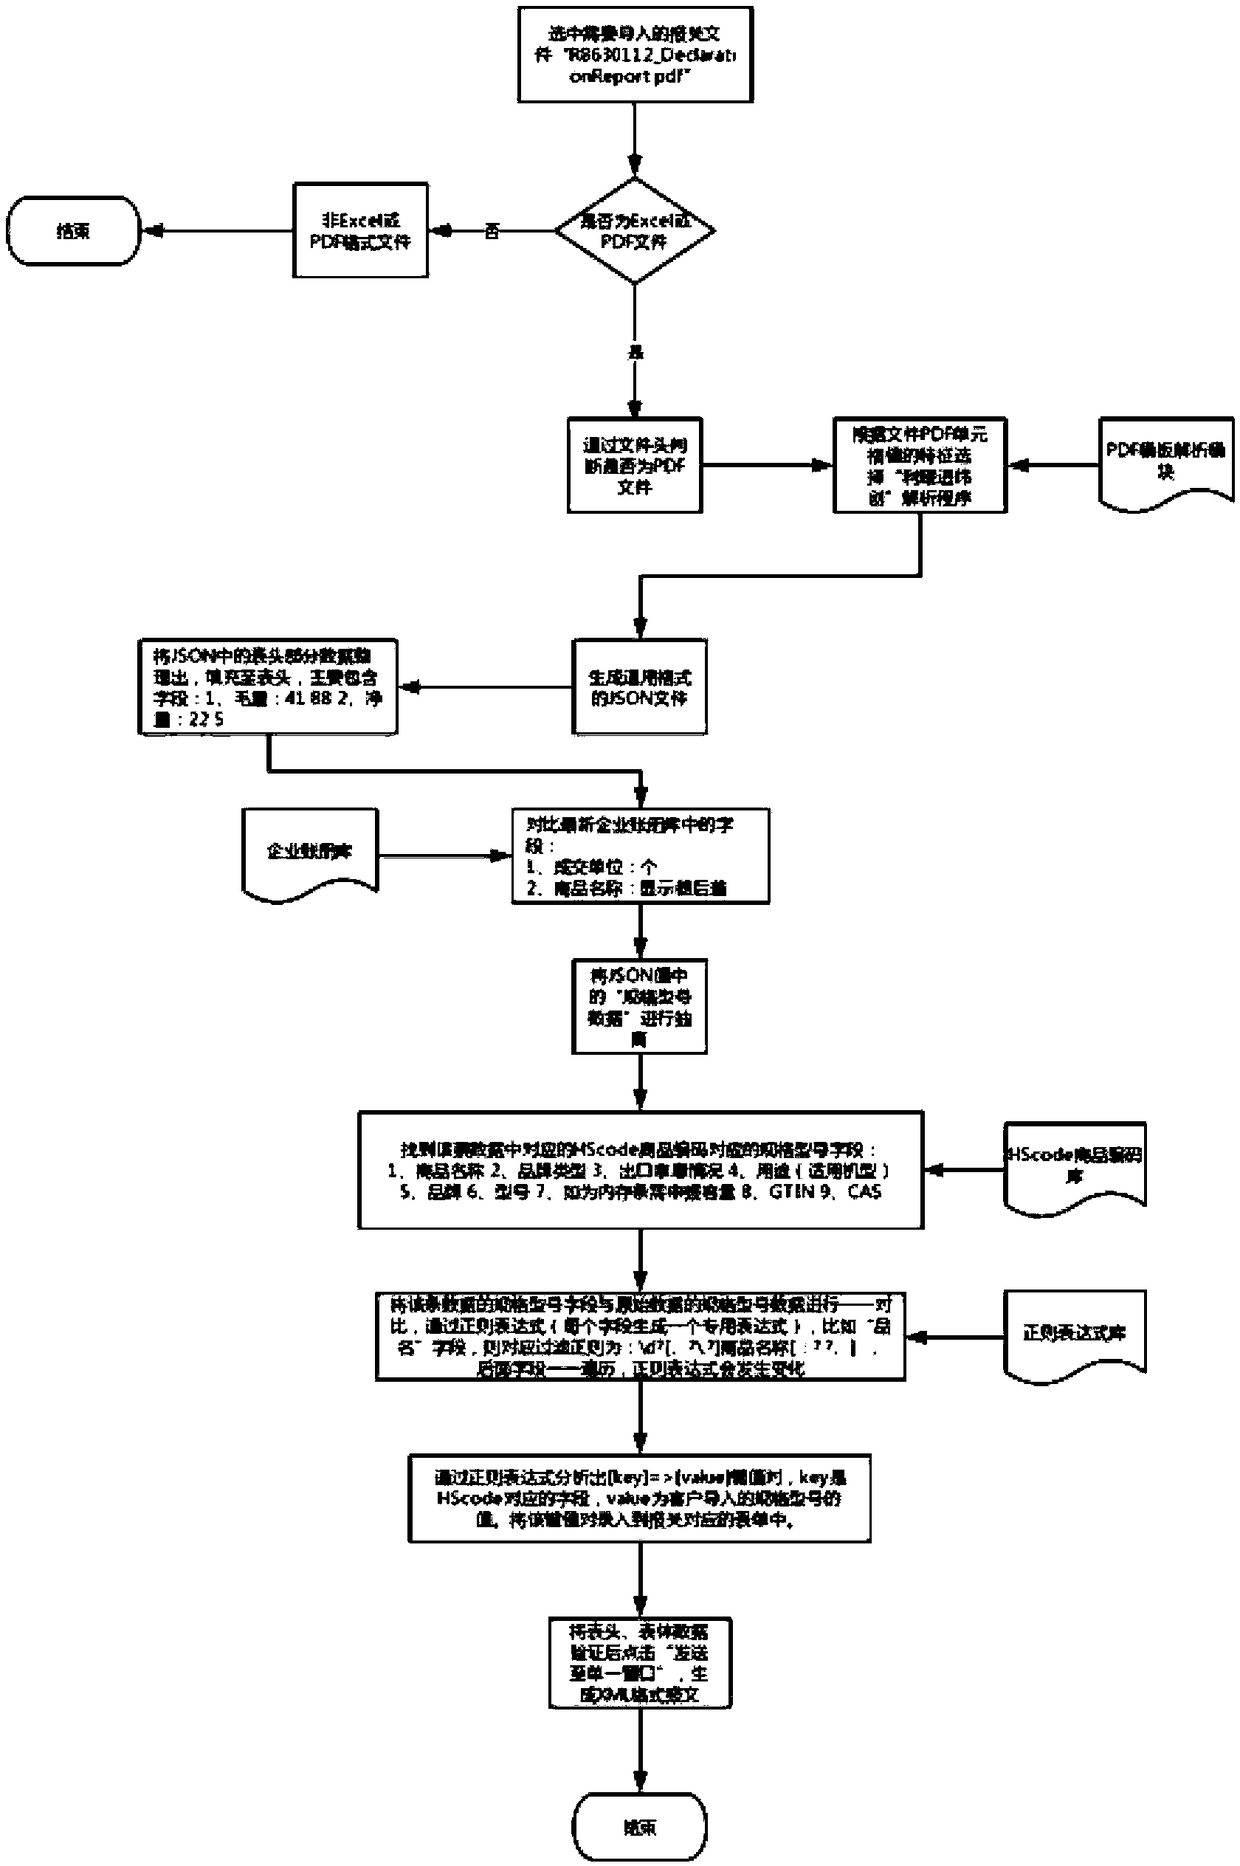 Algorithm for uniformly processing customs declaration files in different formats